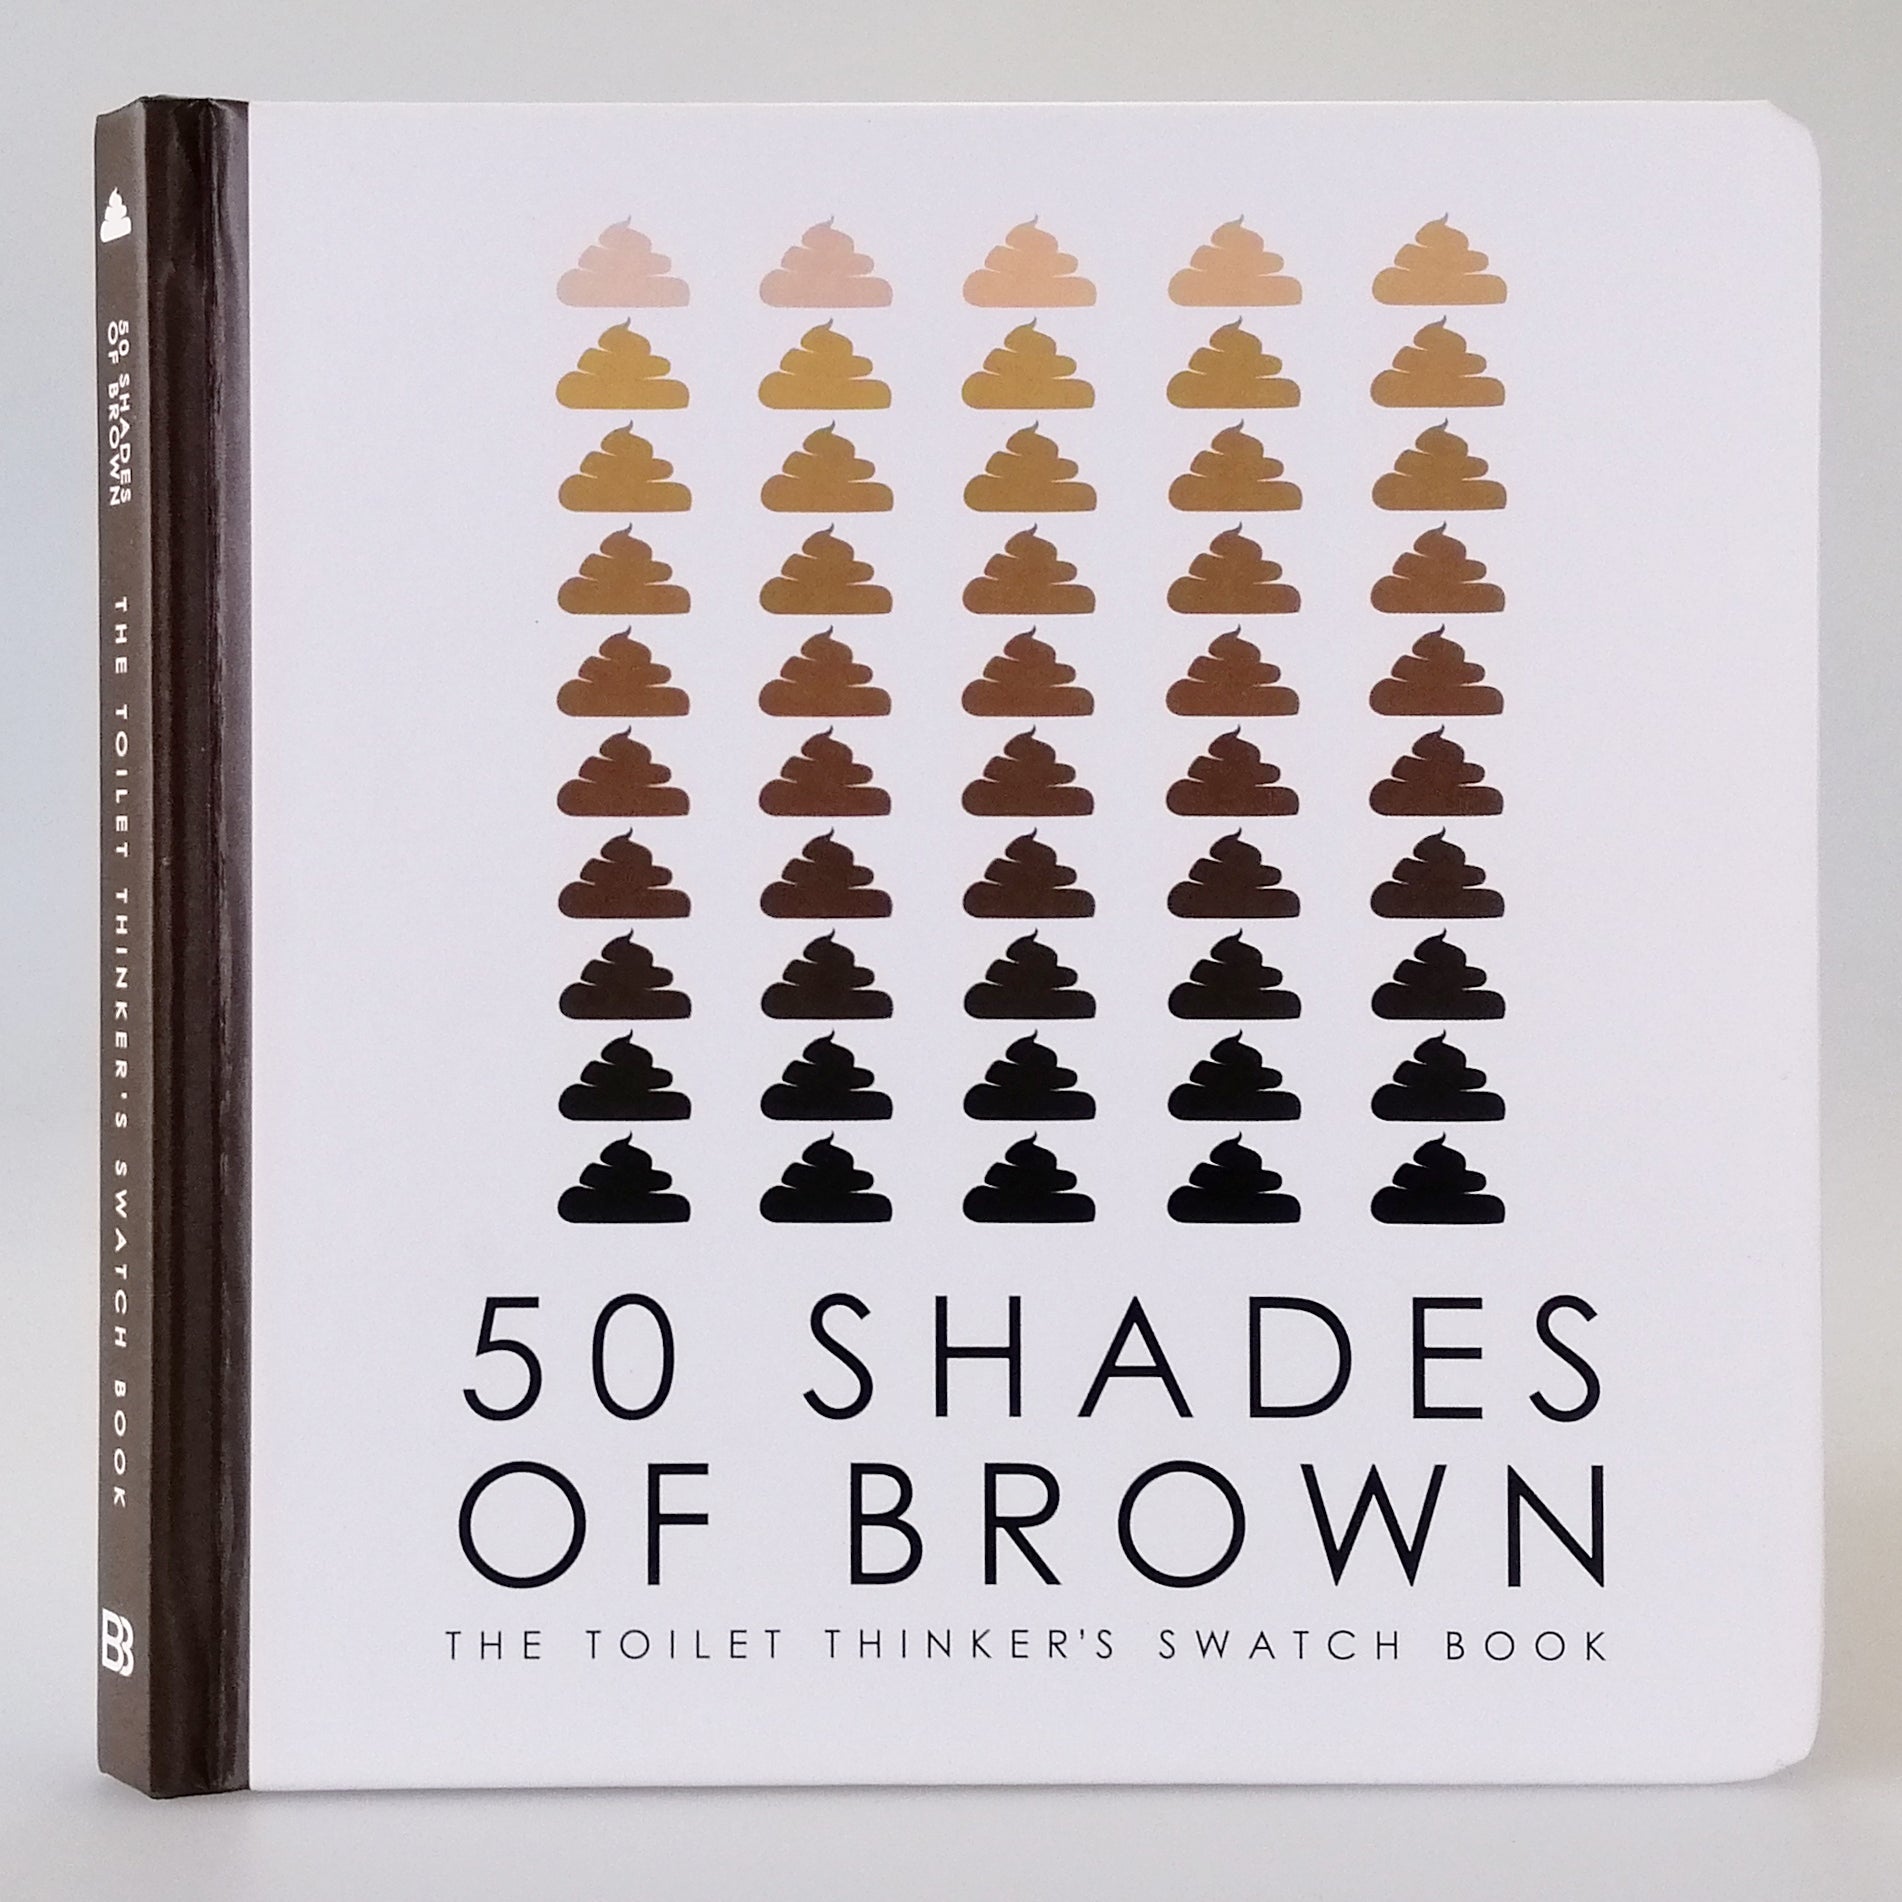 50 Shades of Brown' - The Toilet Thinker's Swatch Book